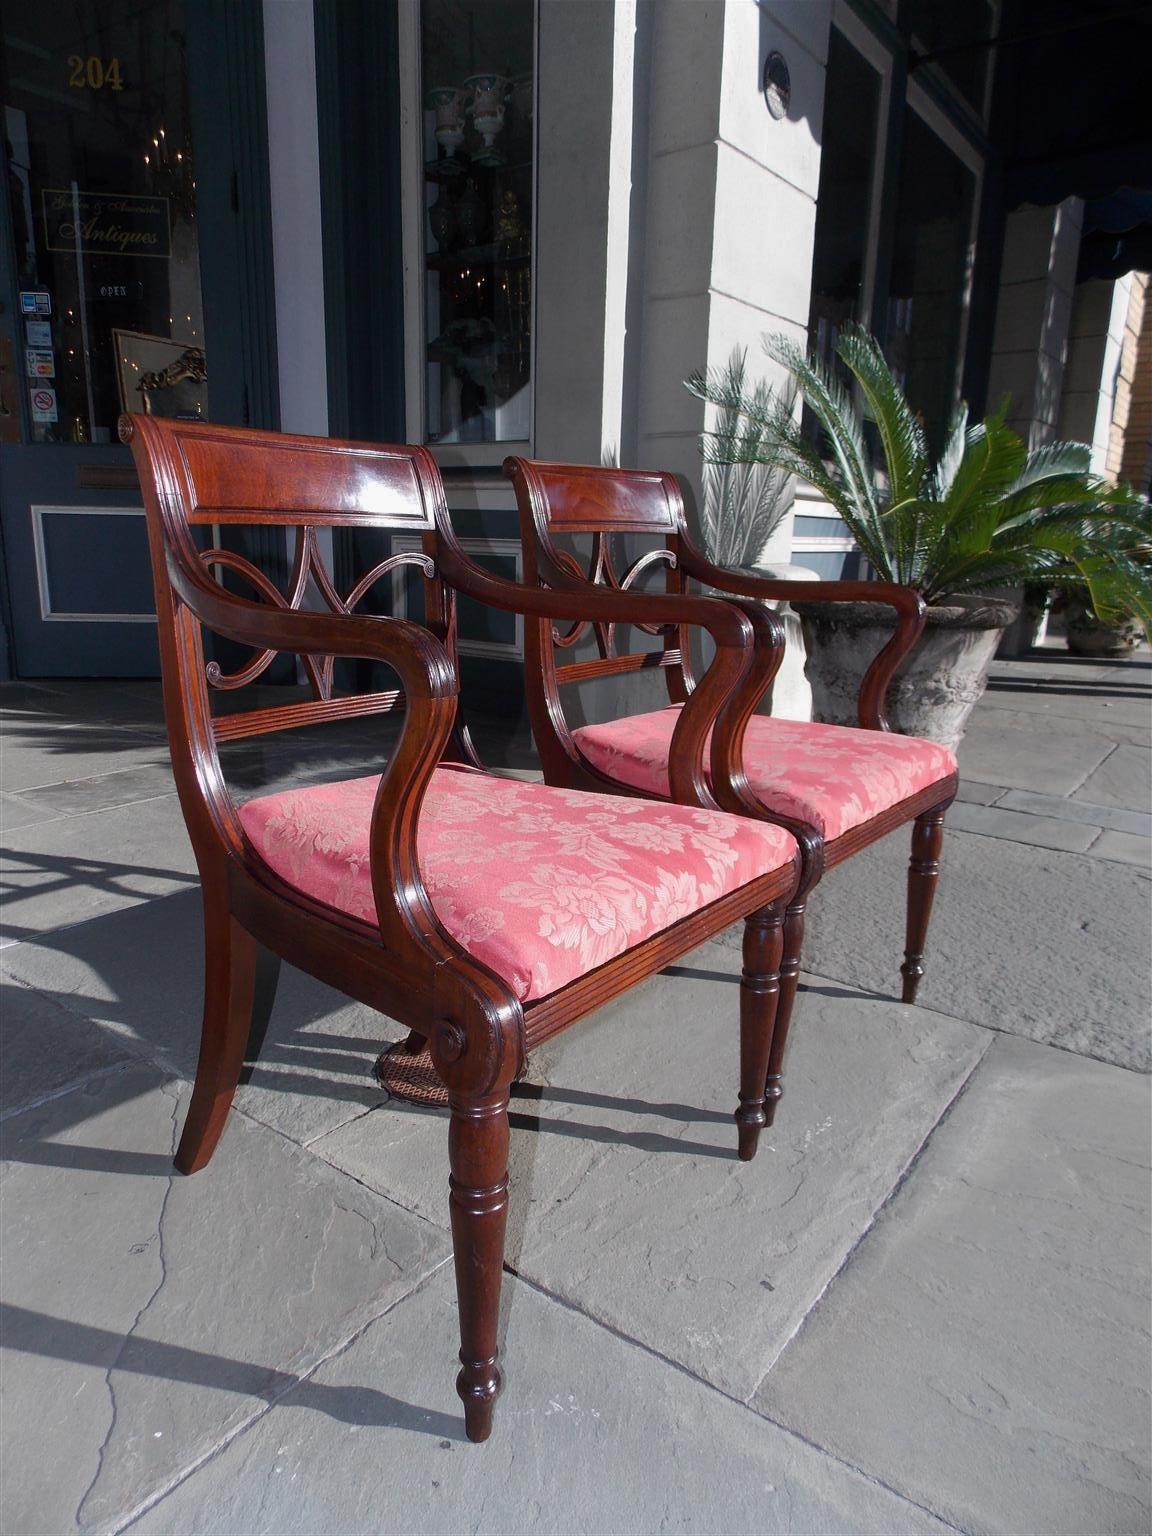 Upholstery Pair of English Regency Mahogany Reeded and Upholstered Armchairs, Circa 1815 For Sale